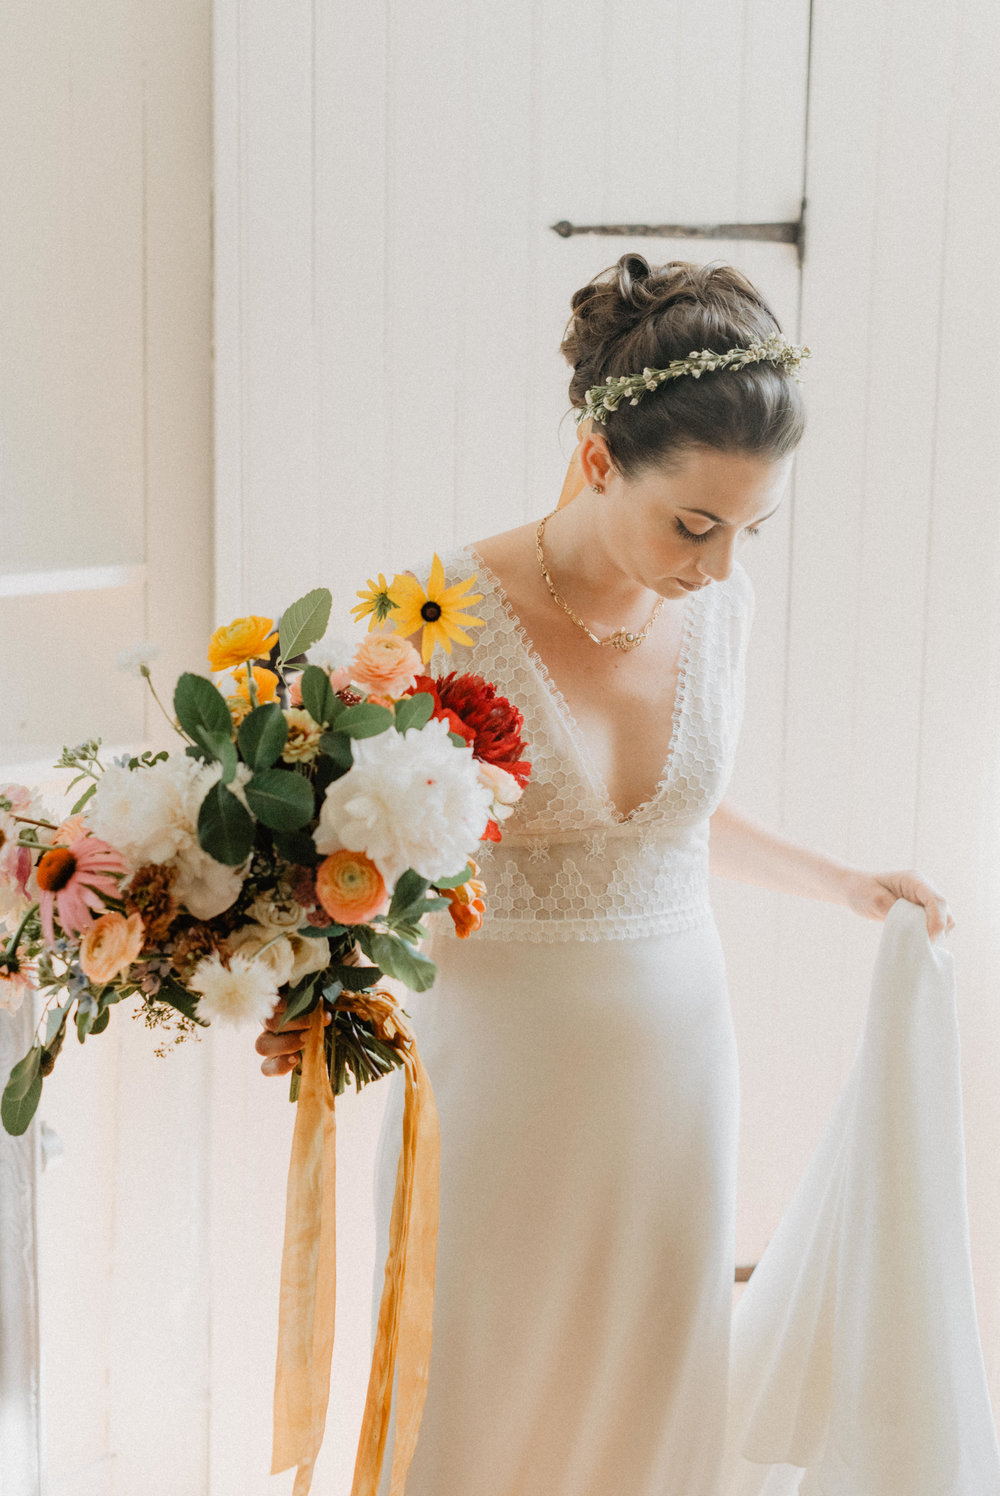 Clever Girl Florals - Meadowlark Photography